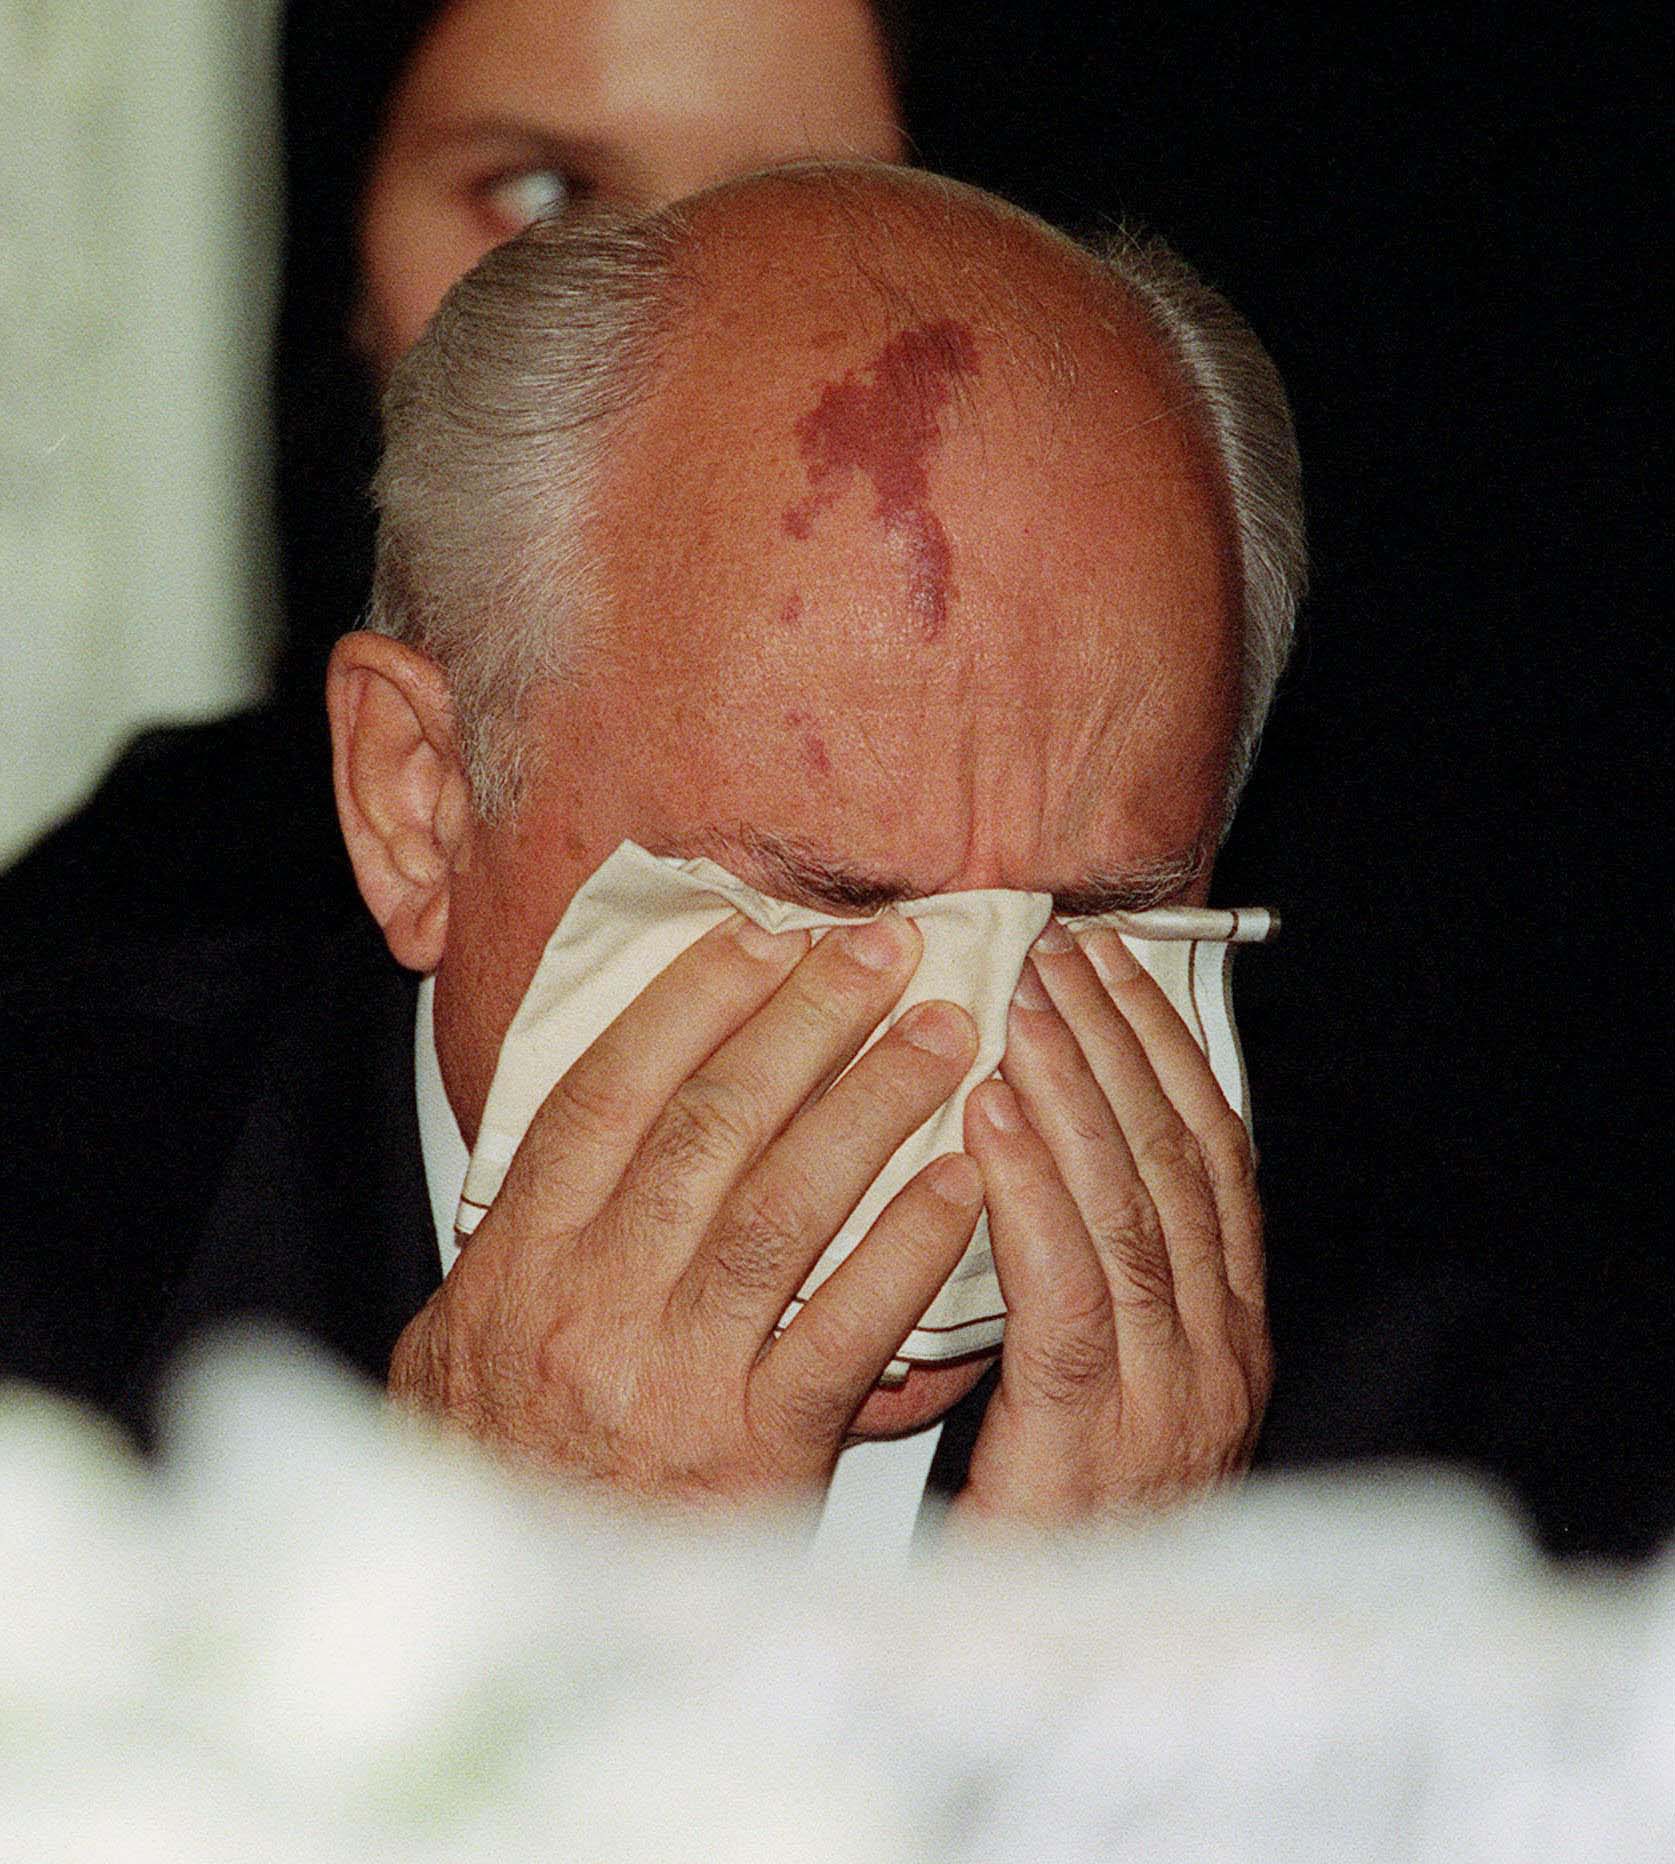 Gorbachev cries at the coffin of his wife, Raisa